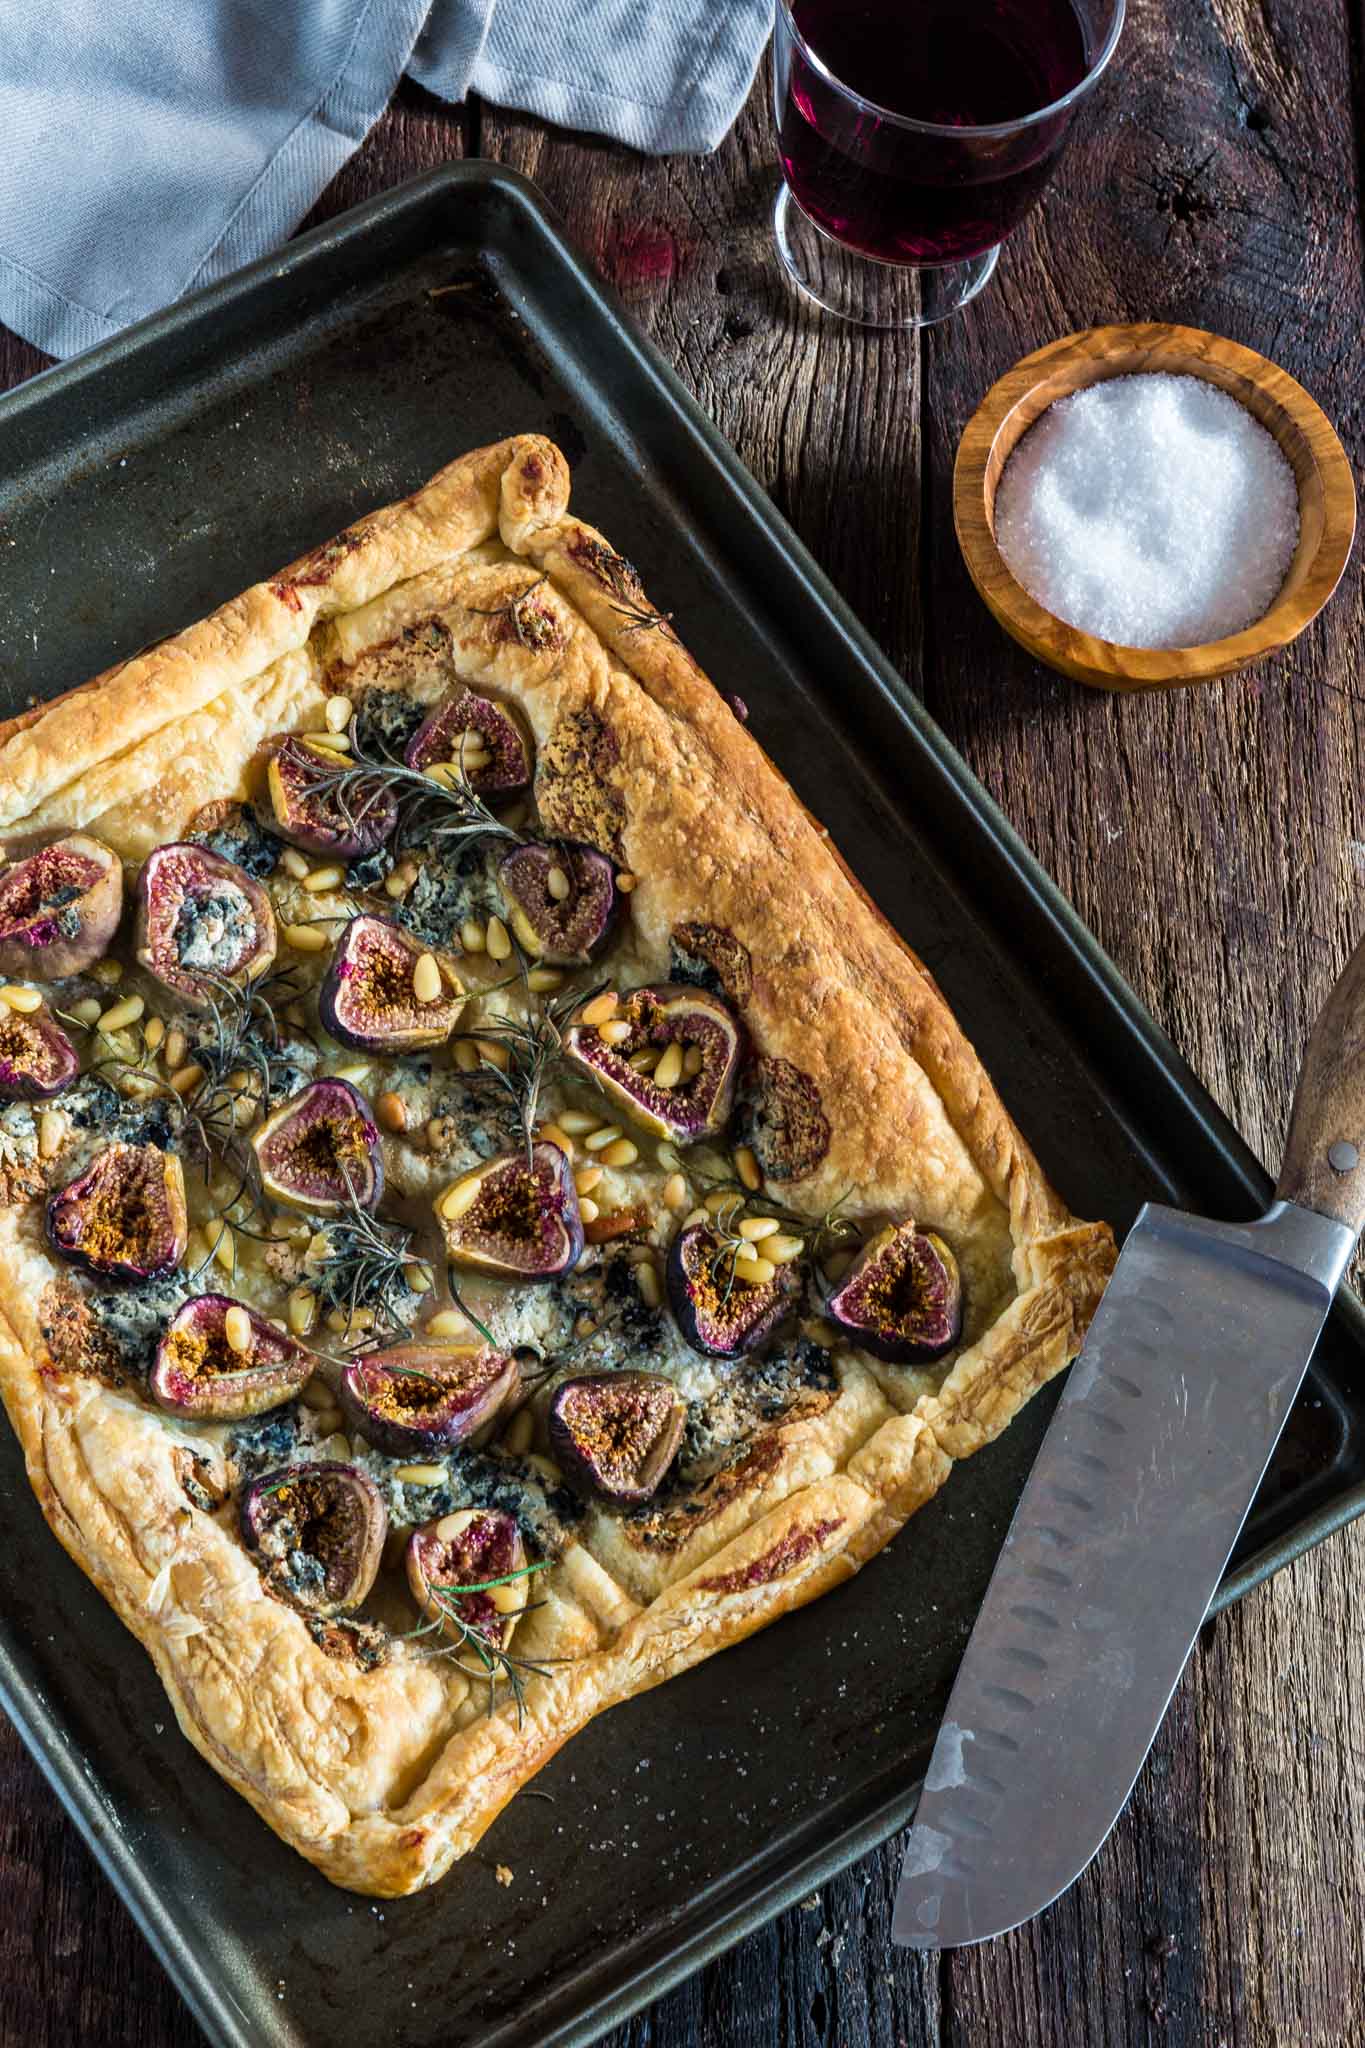 Blue Cheese Fig Tart | www.oliviascuisine.com | A delicious savory and sweet tart, made with blue cheese, fresh figs, rosemary, pine nuts, sea salt and a touch of honey. Serve it for brunch, as an appetizer and/or as a snack and be ready for your tastebuds to start dancing the can-can!